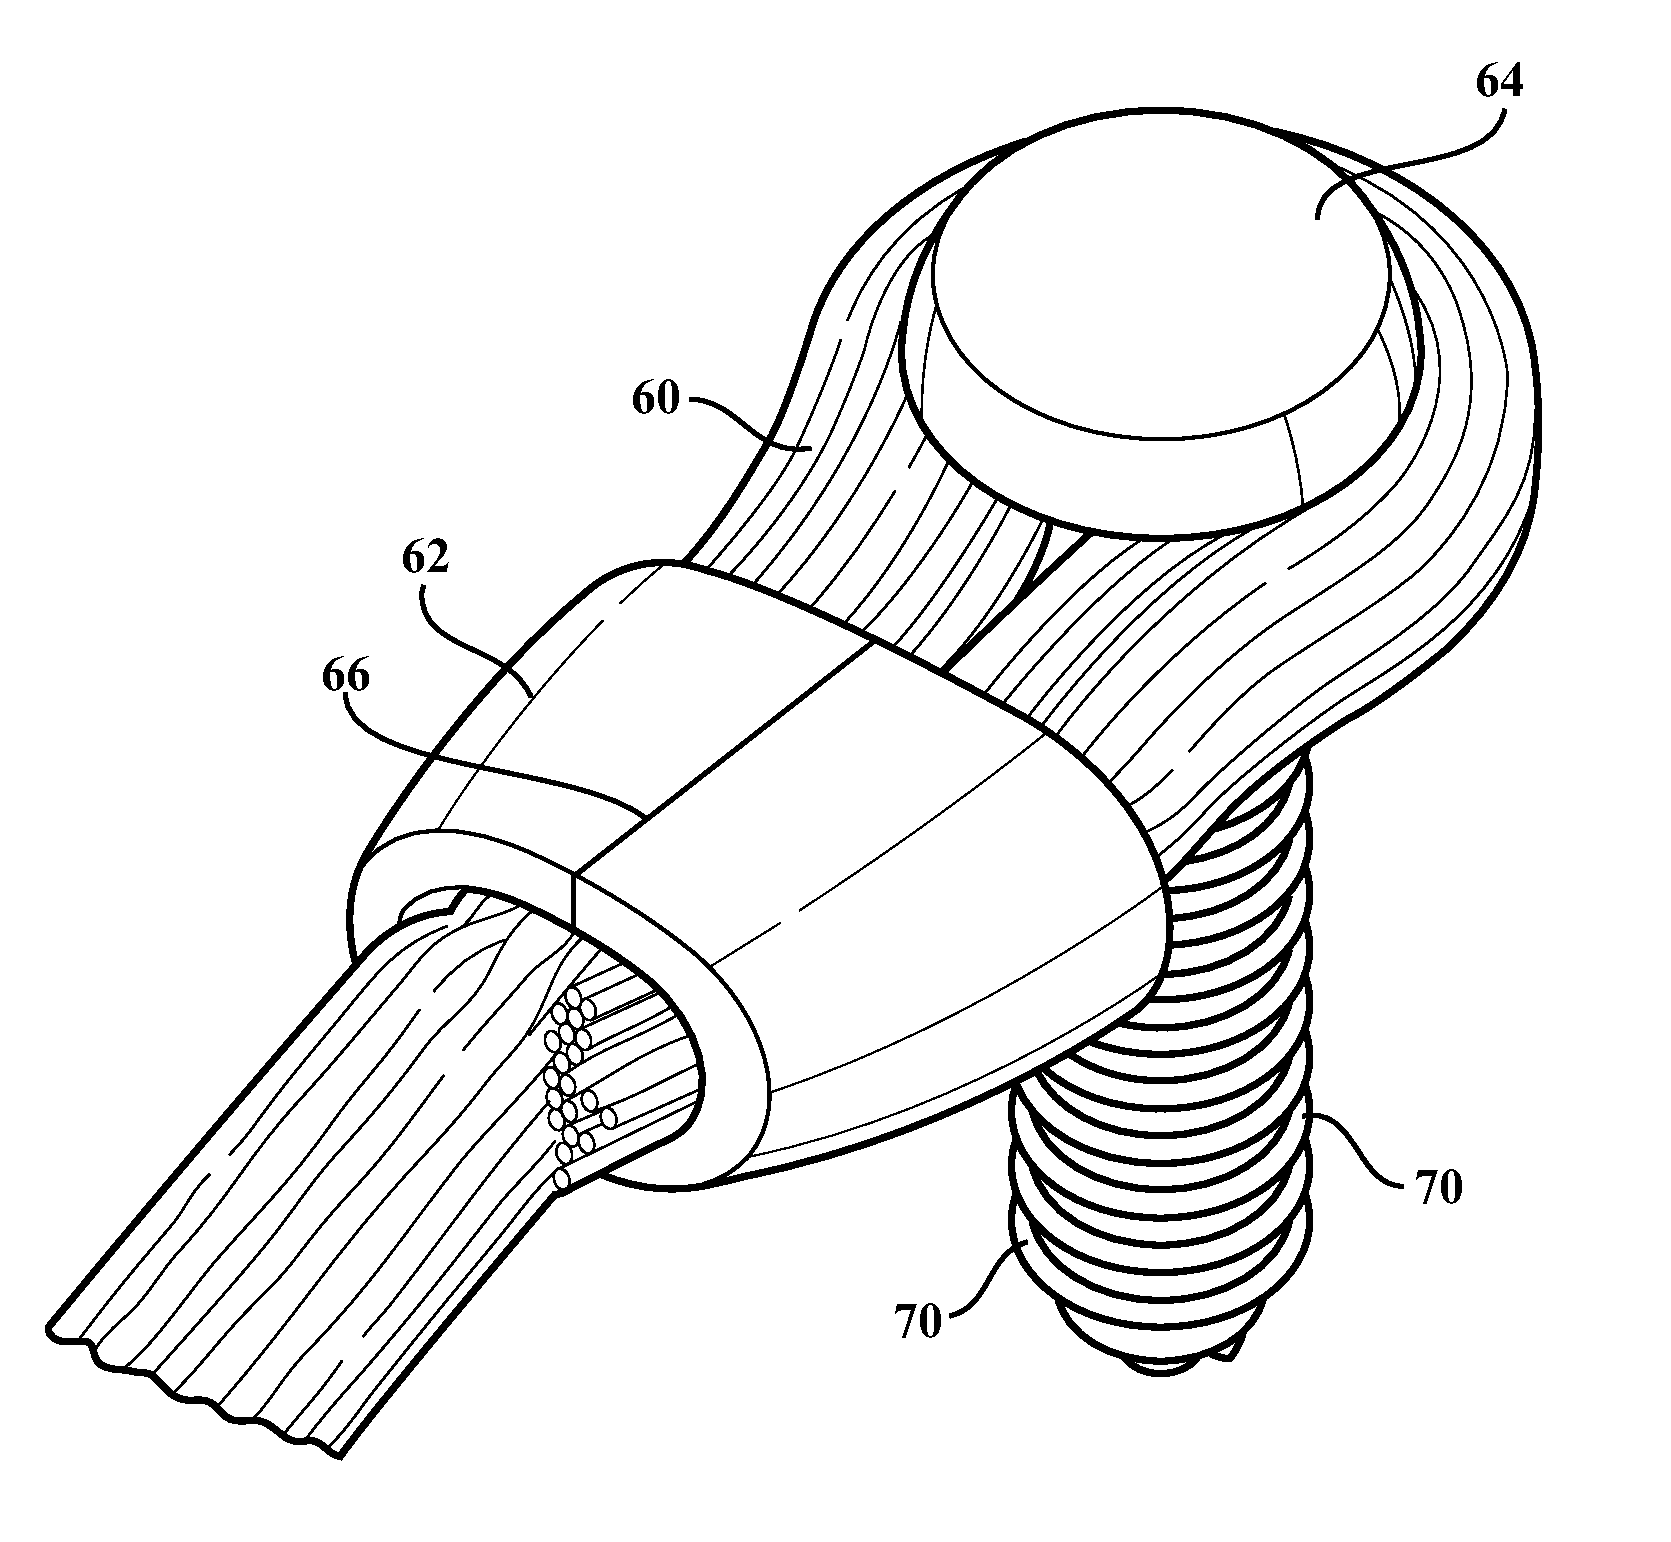 Clamping assemblies for securing ligaments to a bone